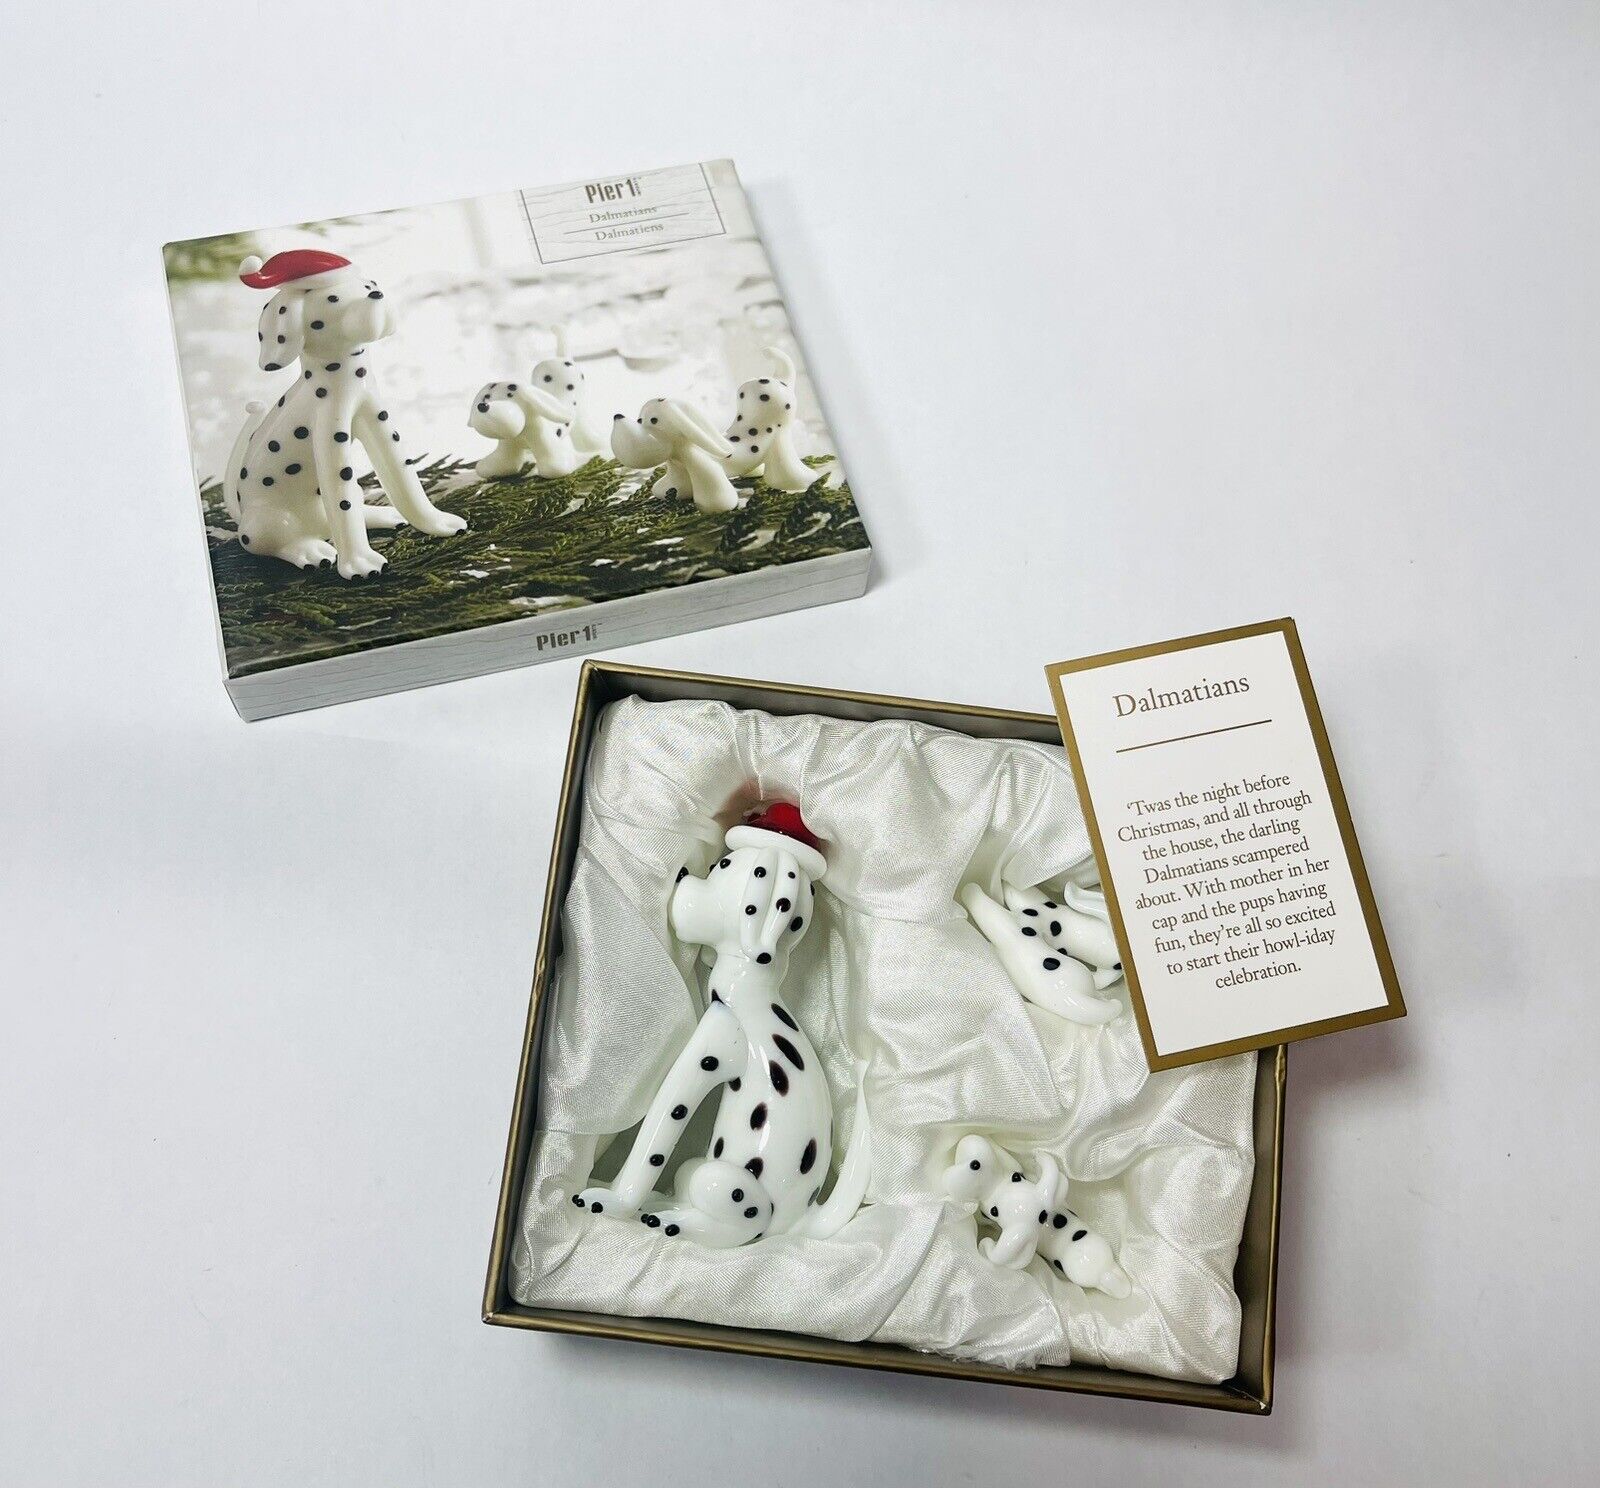 Pier 1 Dalmatians Glass Figurines Christmas Decor Gift Adorable New in Box